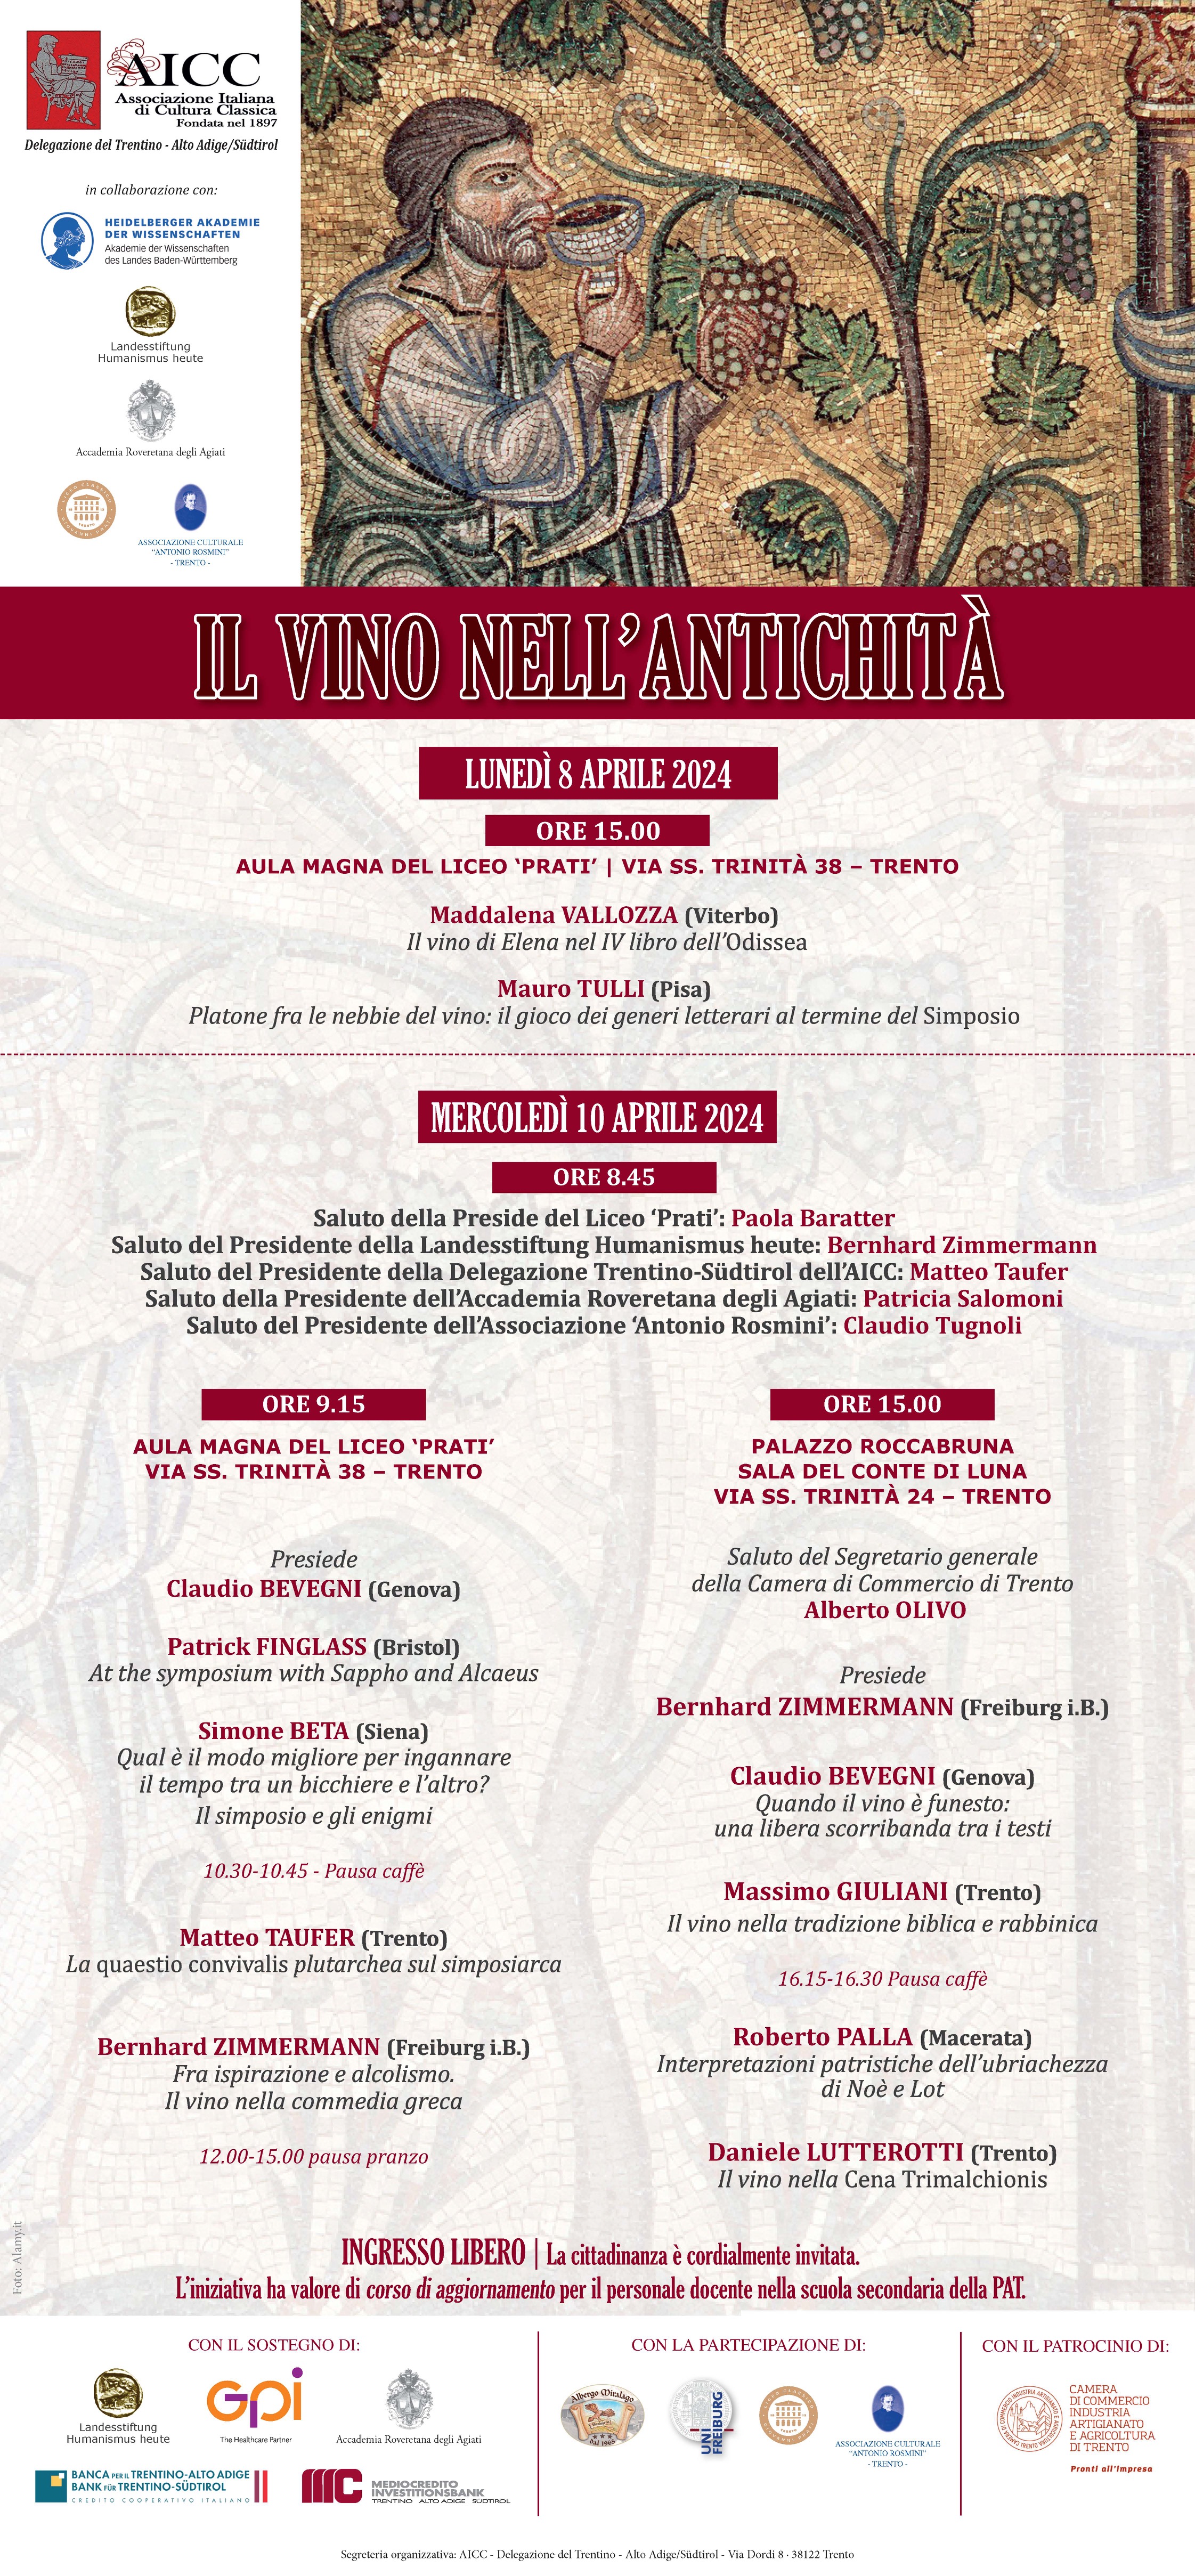 Conference poster with program